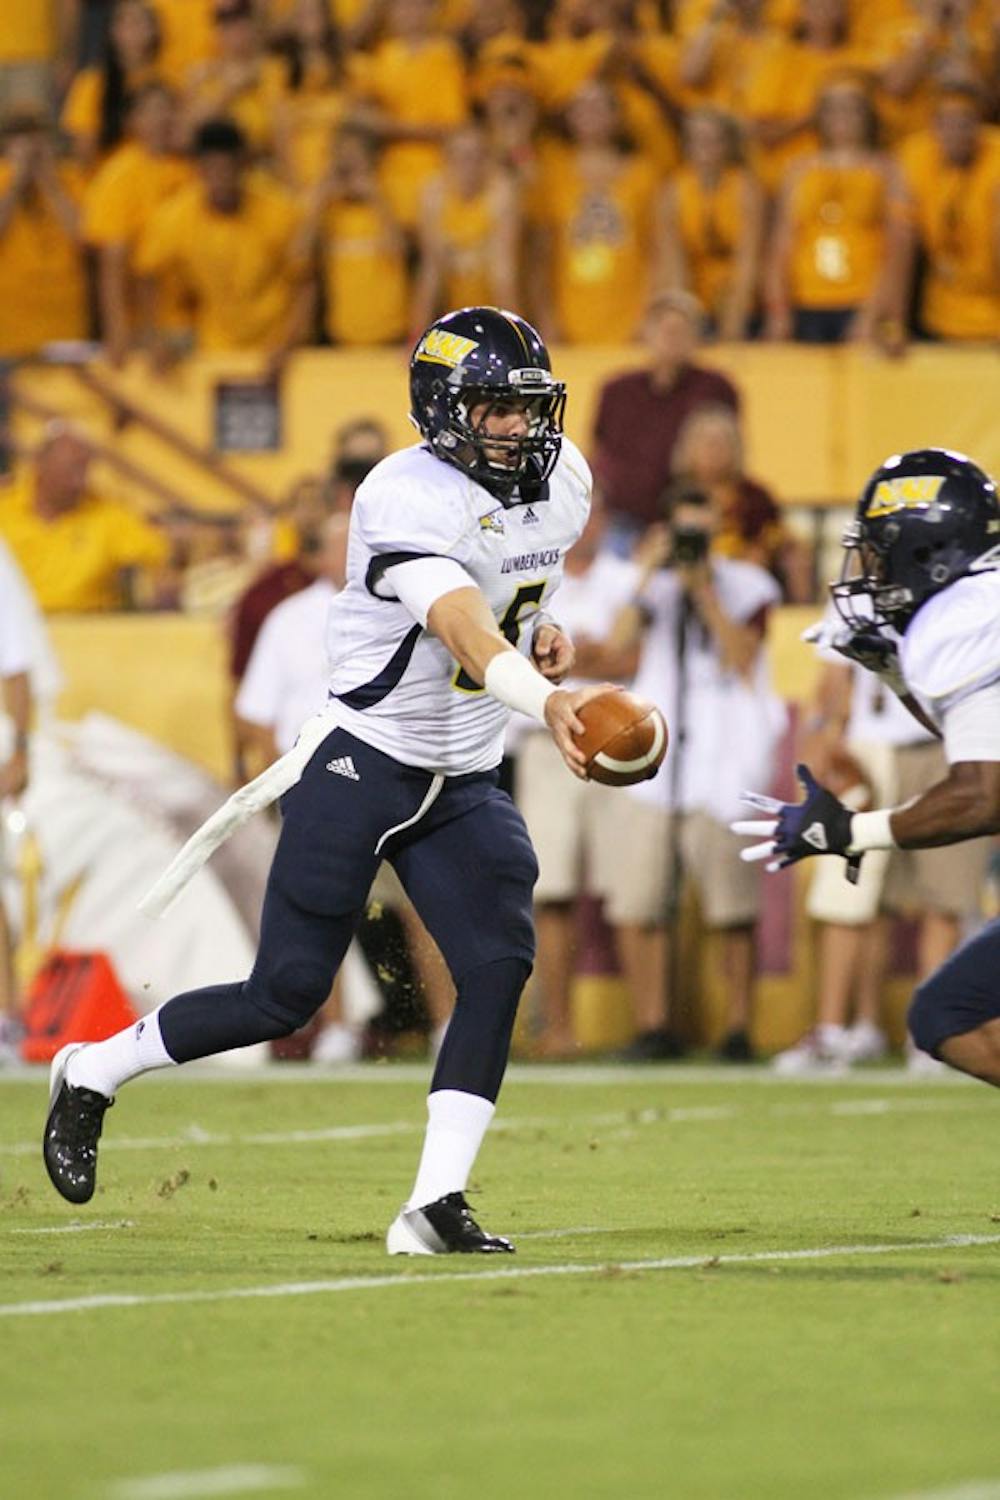 NAU senior quarterback Cary Grossart hands the ball off to junior running back Zach Bauman during NAU’s 63-6 loss to ASU on Thursday. Both of Lumberjacks’ impact players had suffered game-ending injuries in the first half. (Photo by Sam Rosenbaum)
